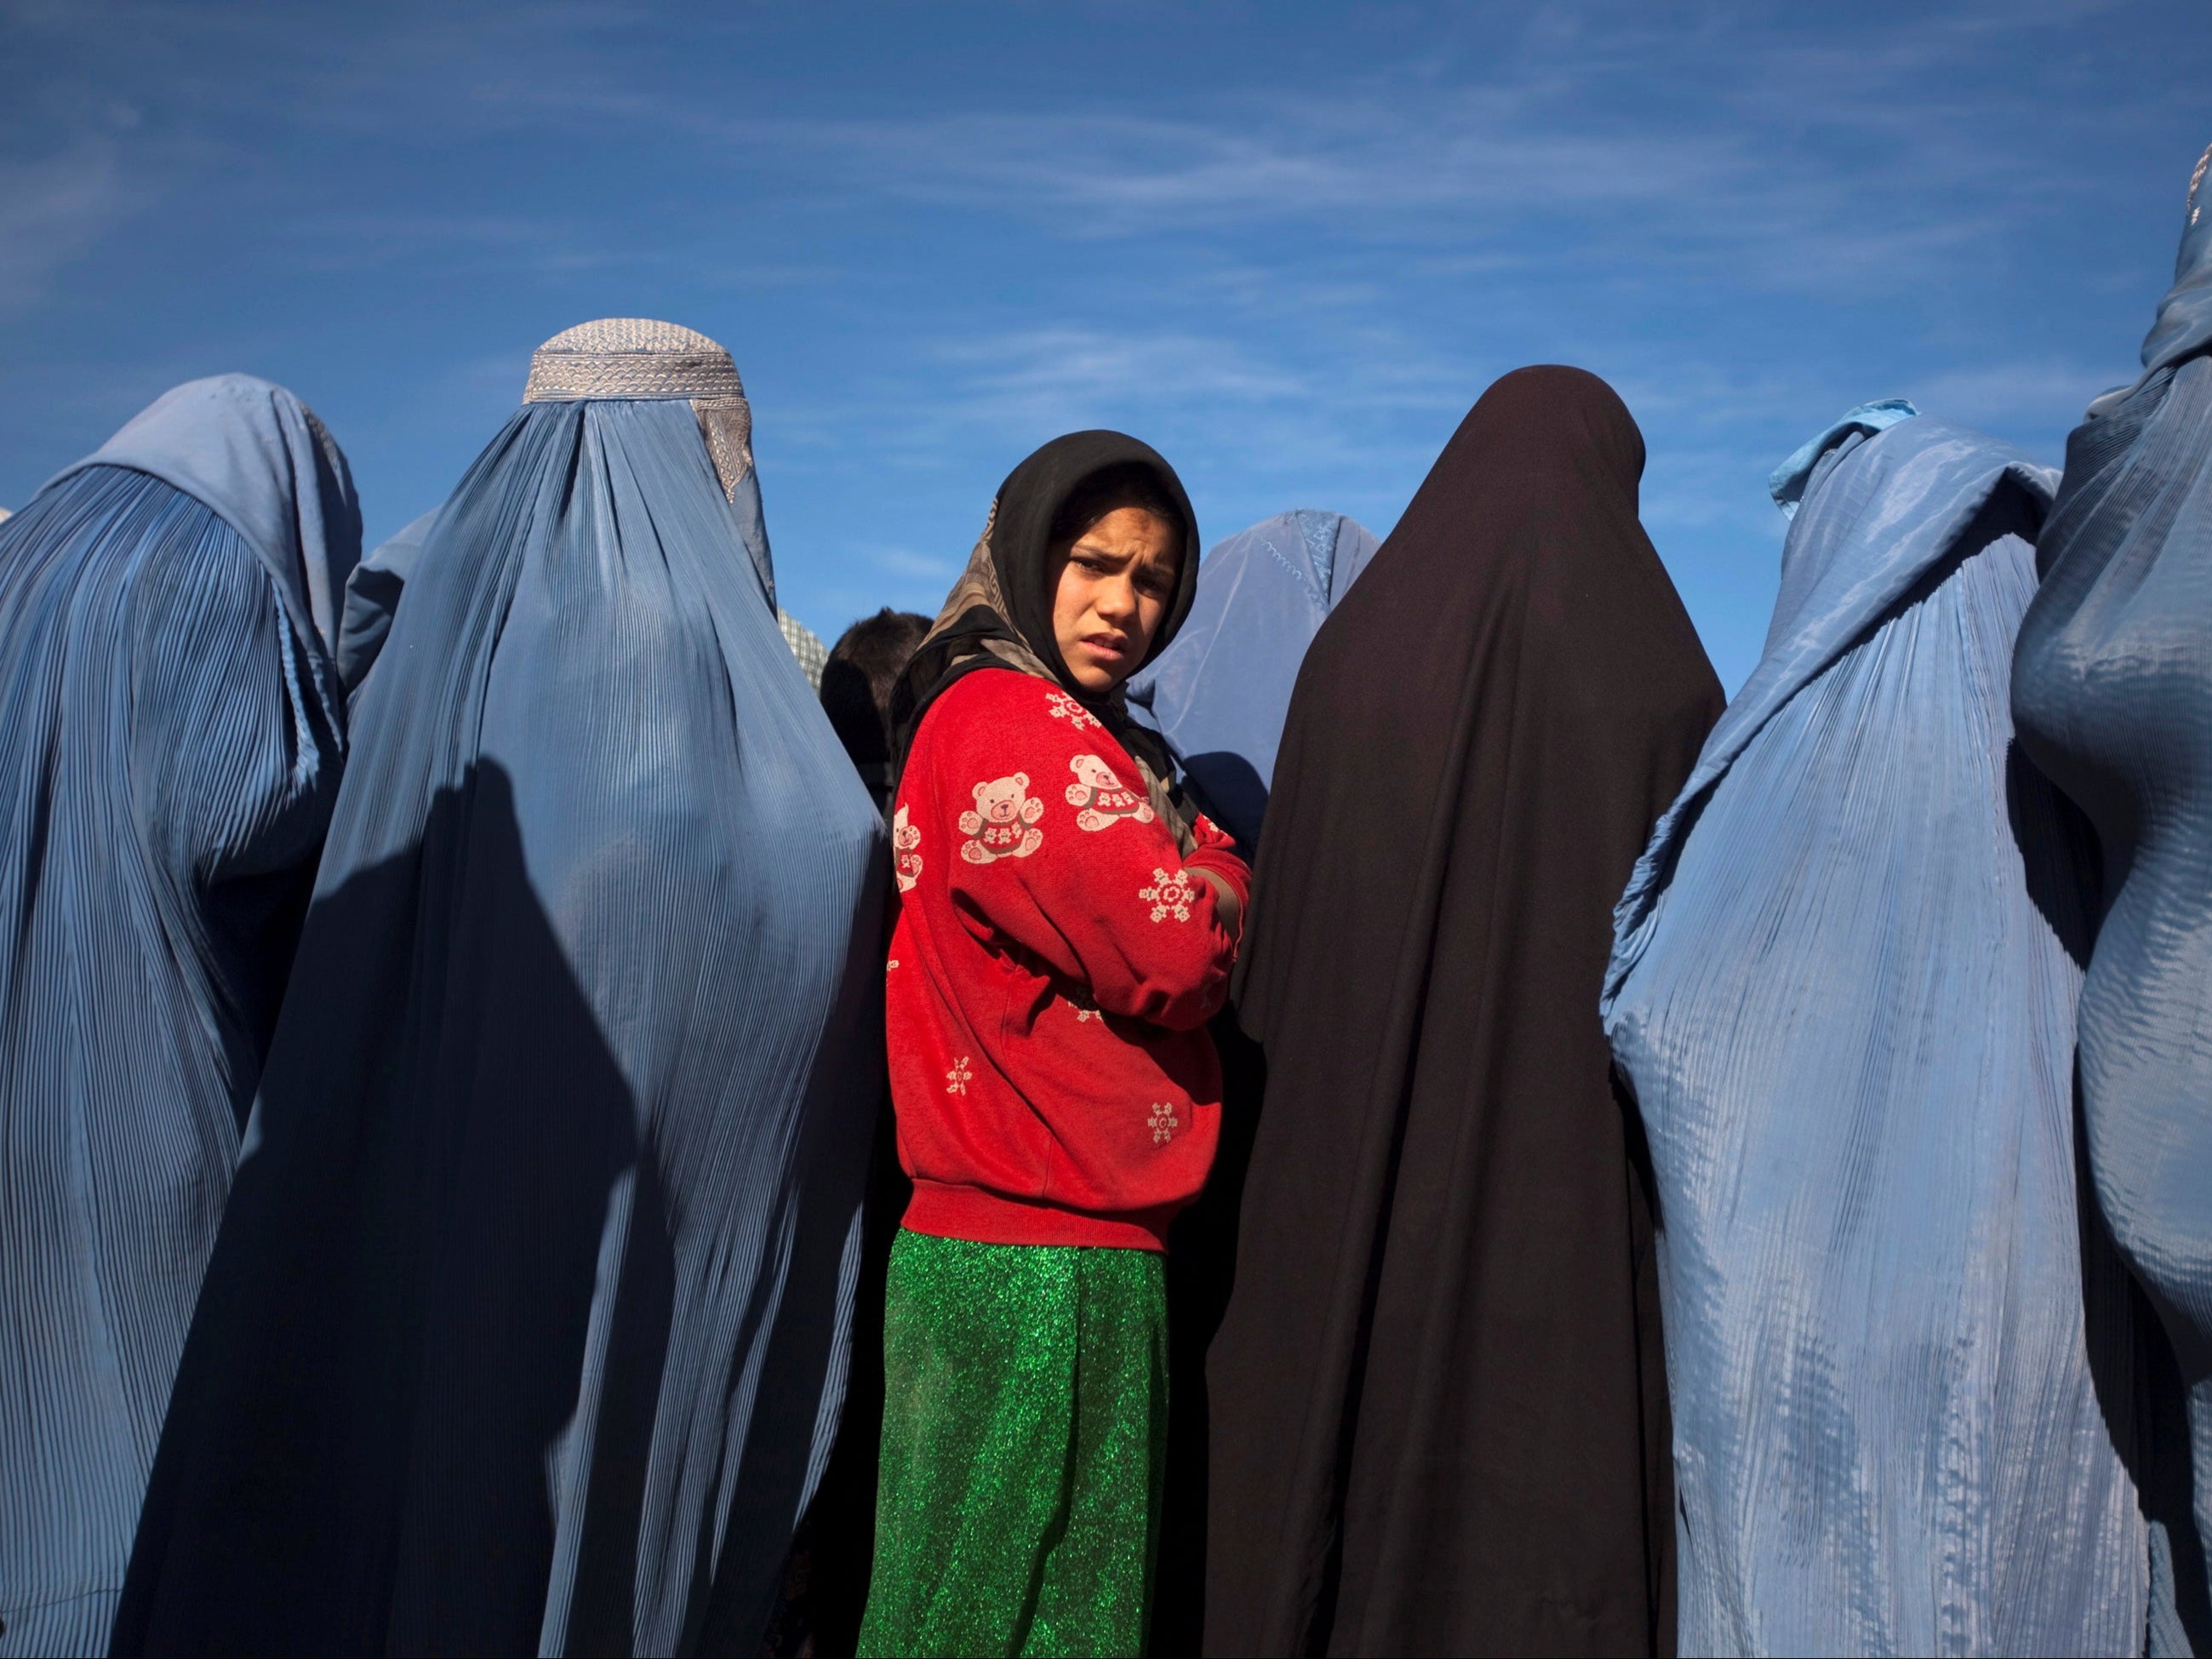 An Afghan girl stands among widows during a project by CARE International in Kabul earlier this year